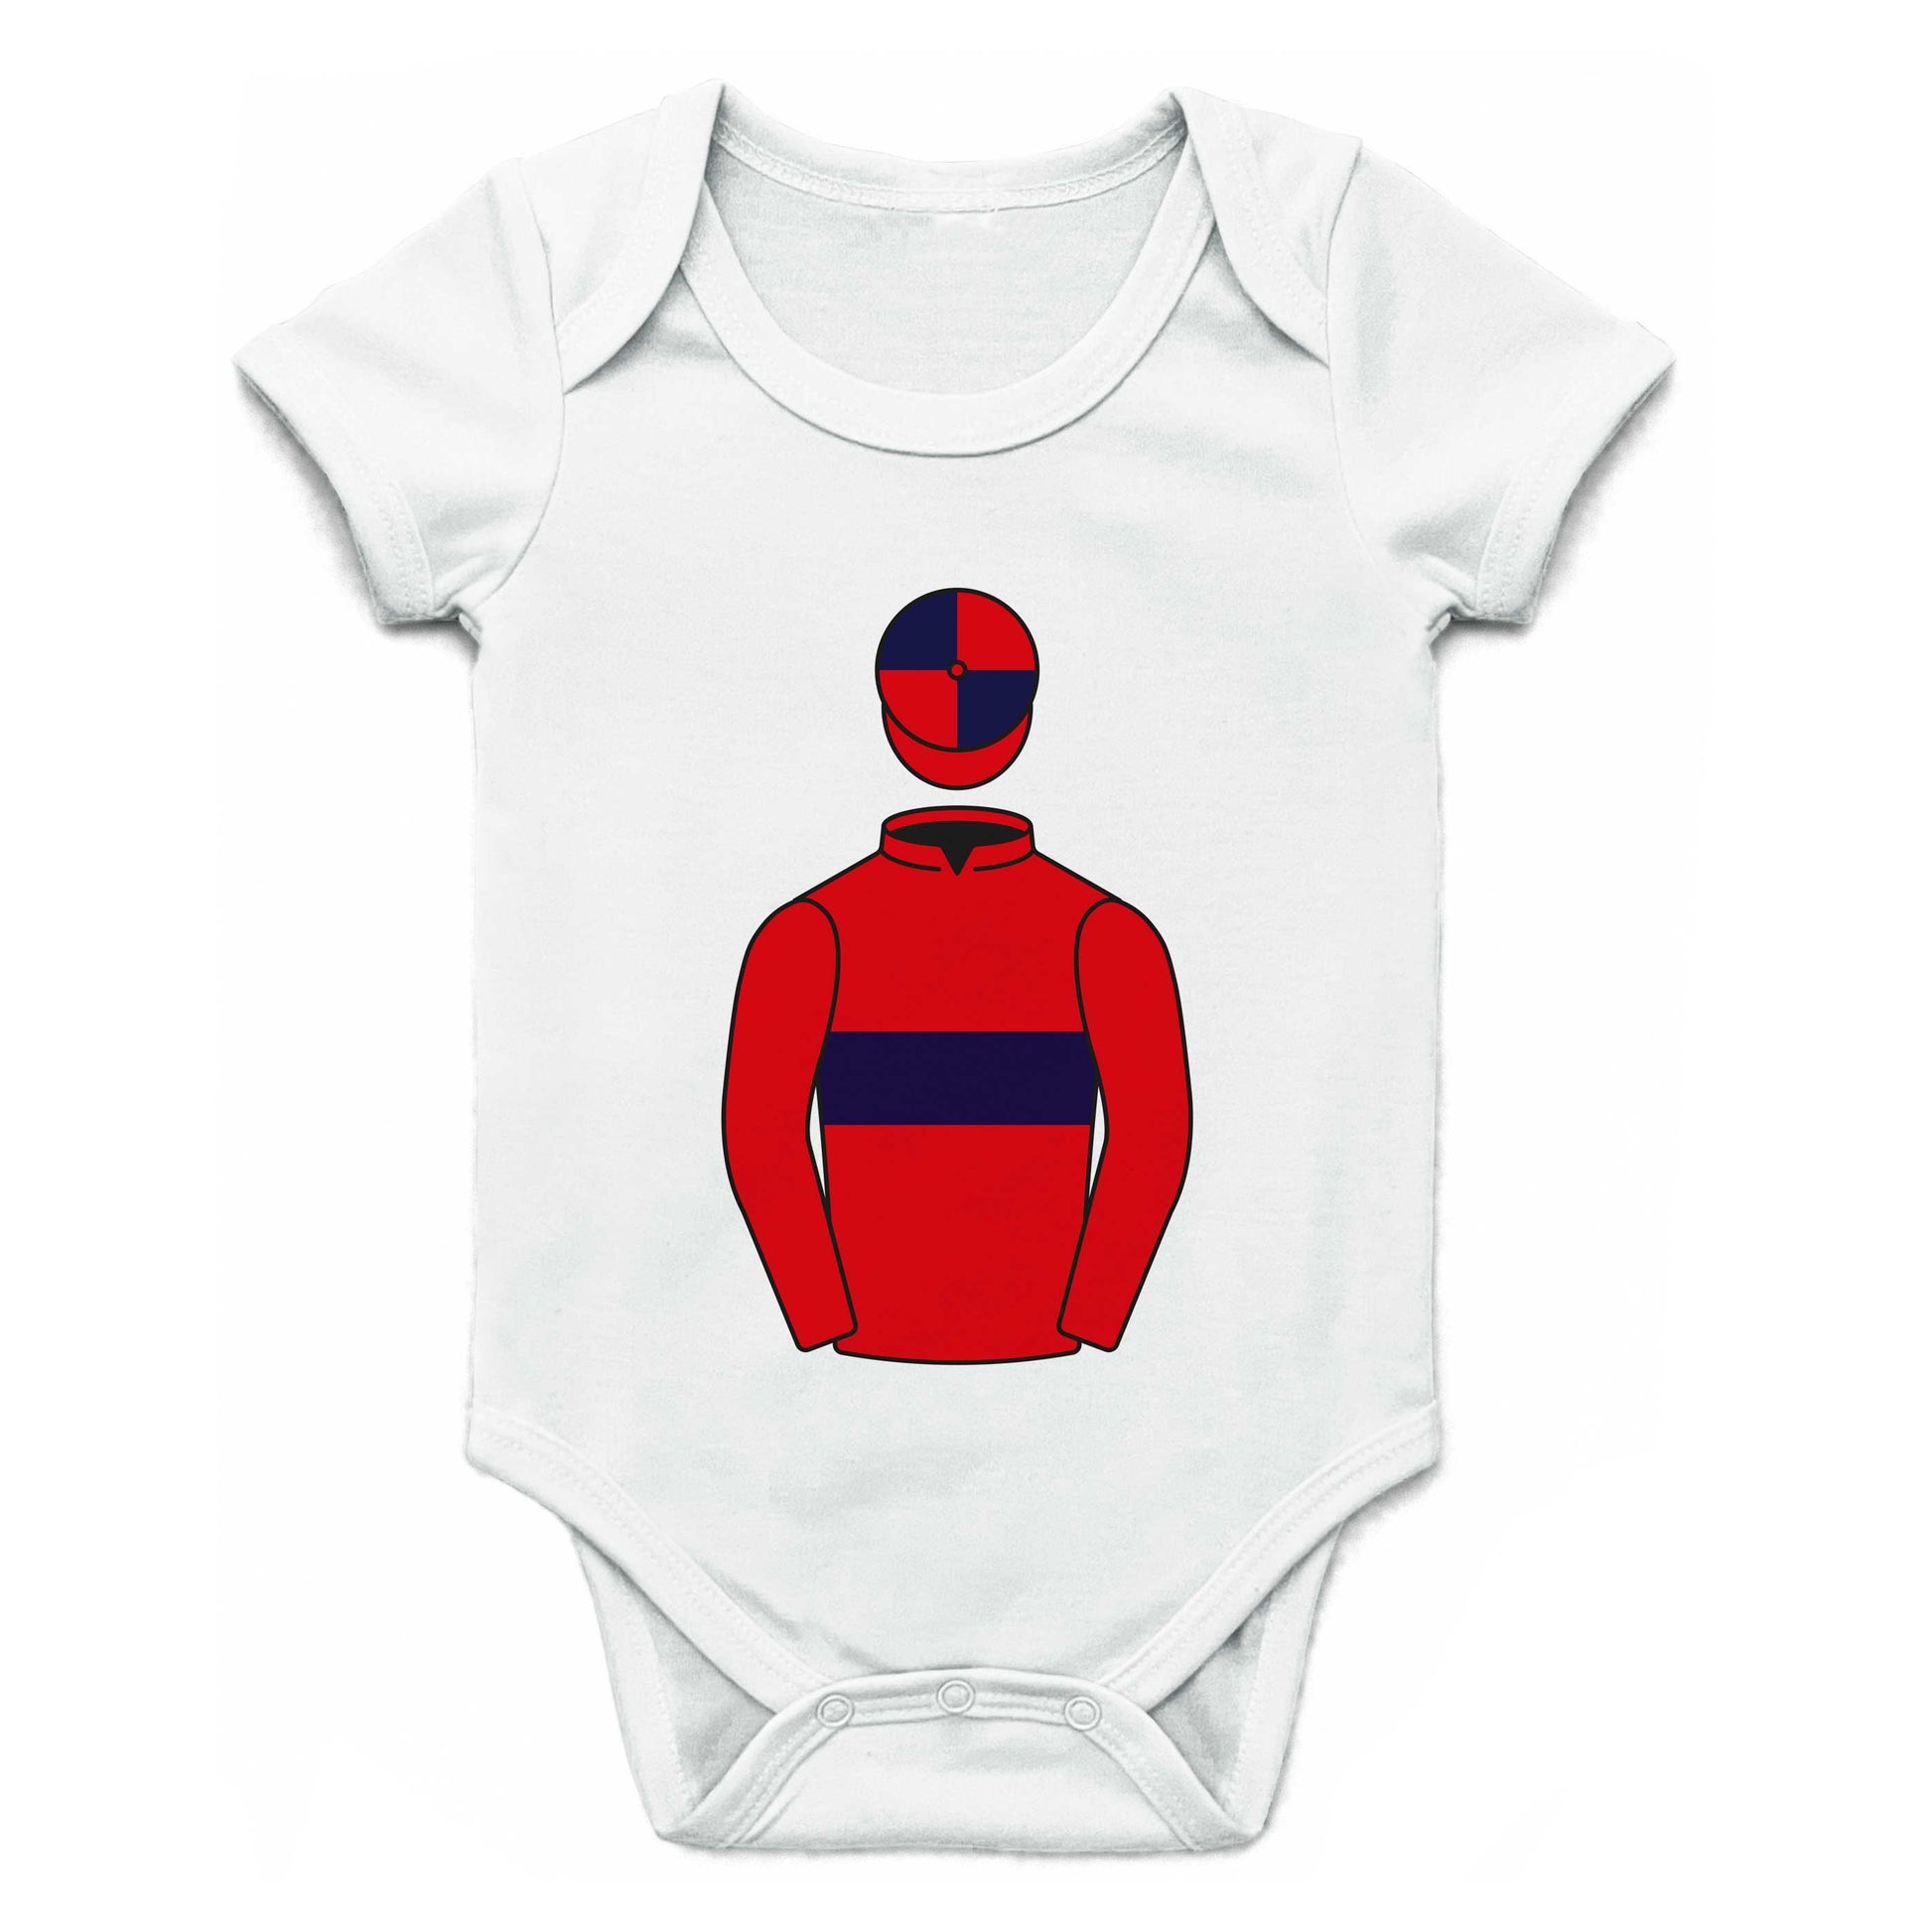 The Woodway 20 Single Silks Baby Grow - Baby Grow - Hacked Up